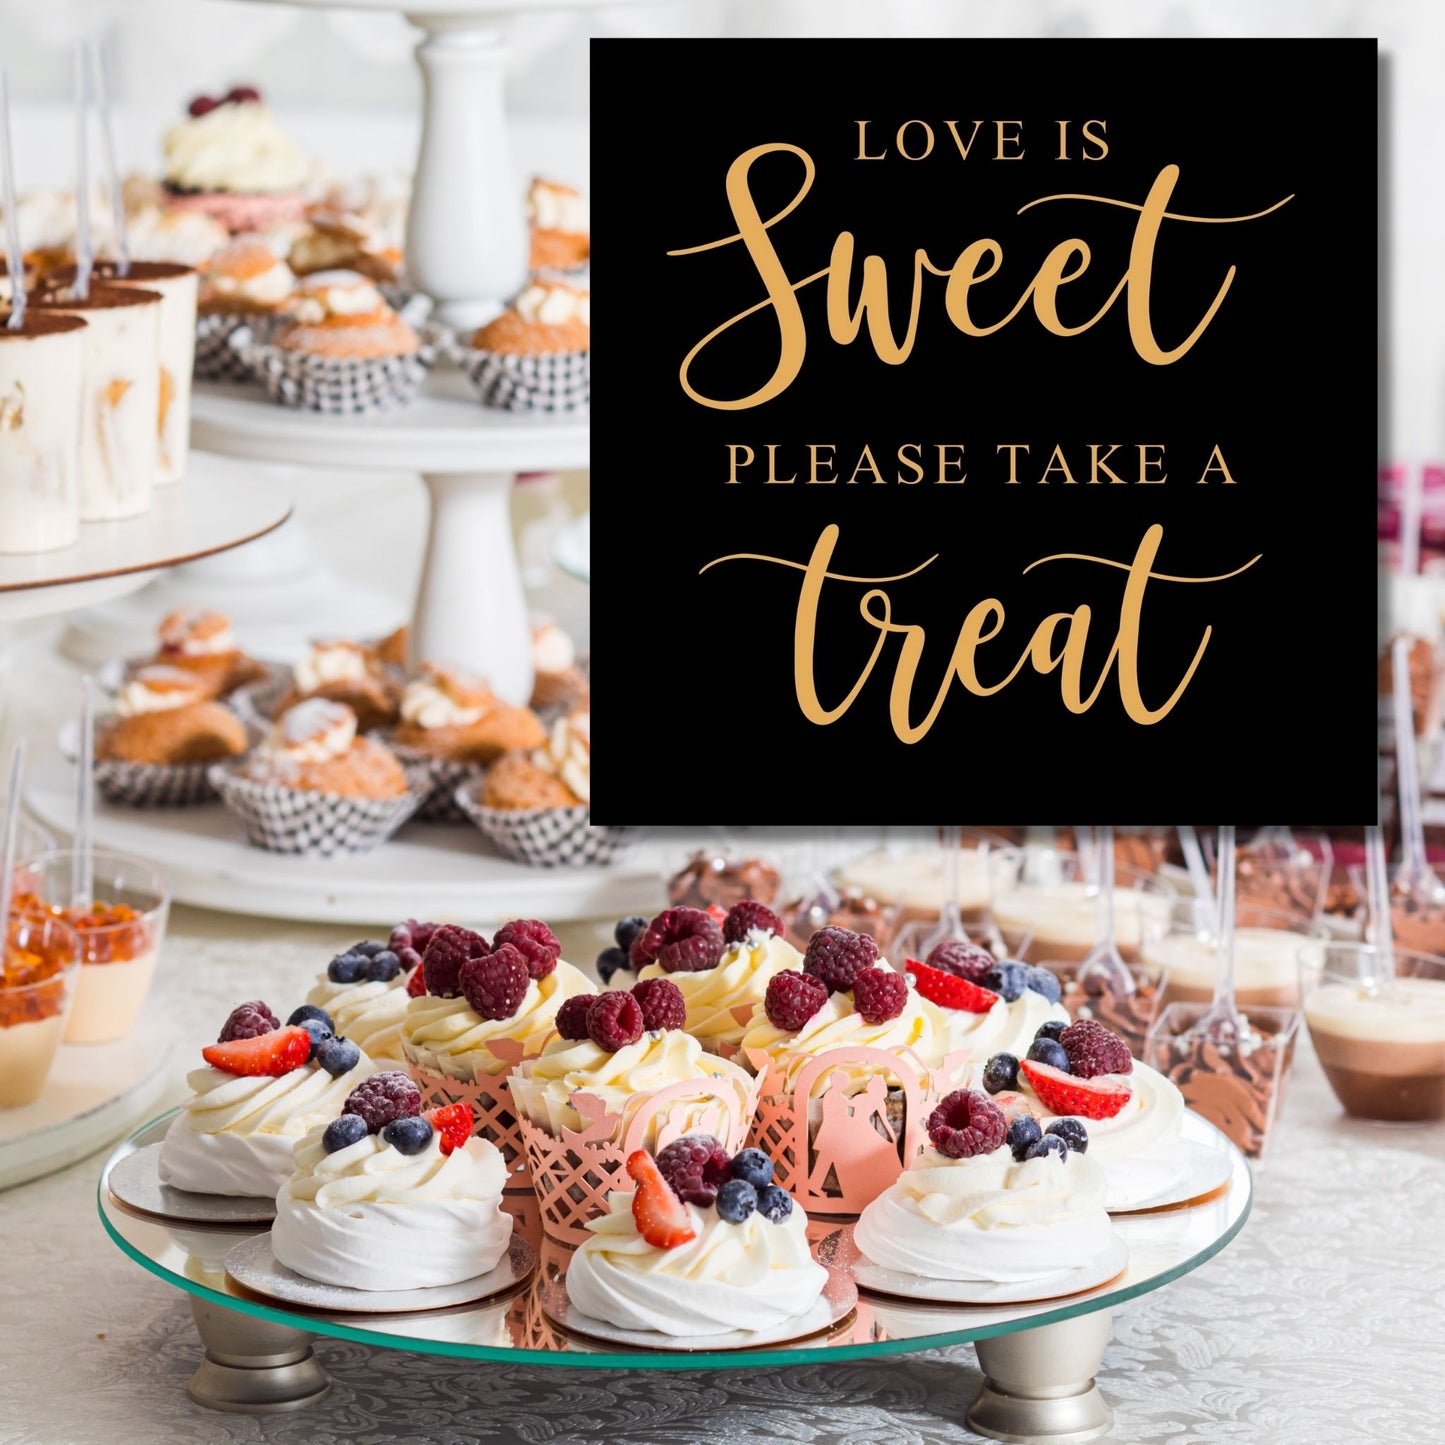 Love is Sweet Please Take a Treat Wedding Reception Sign